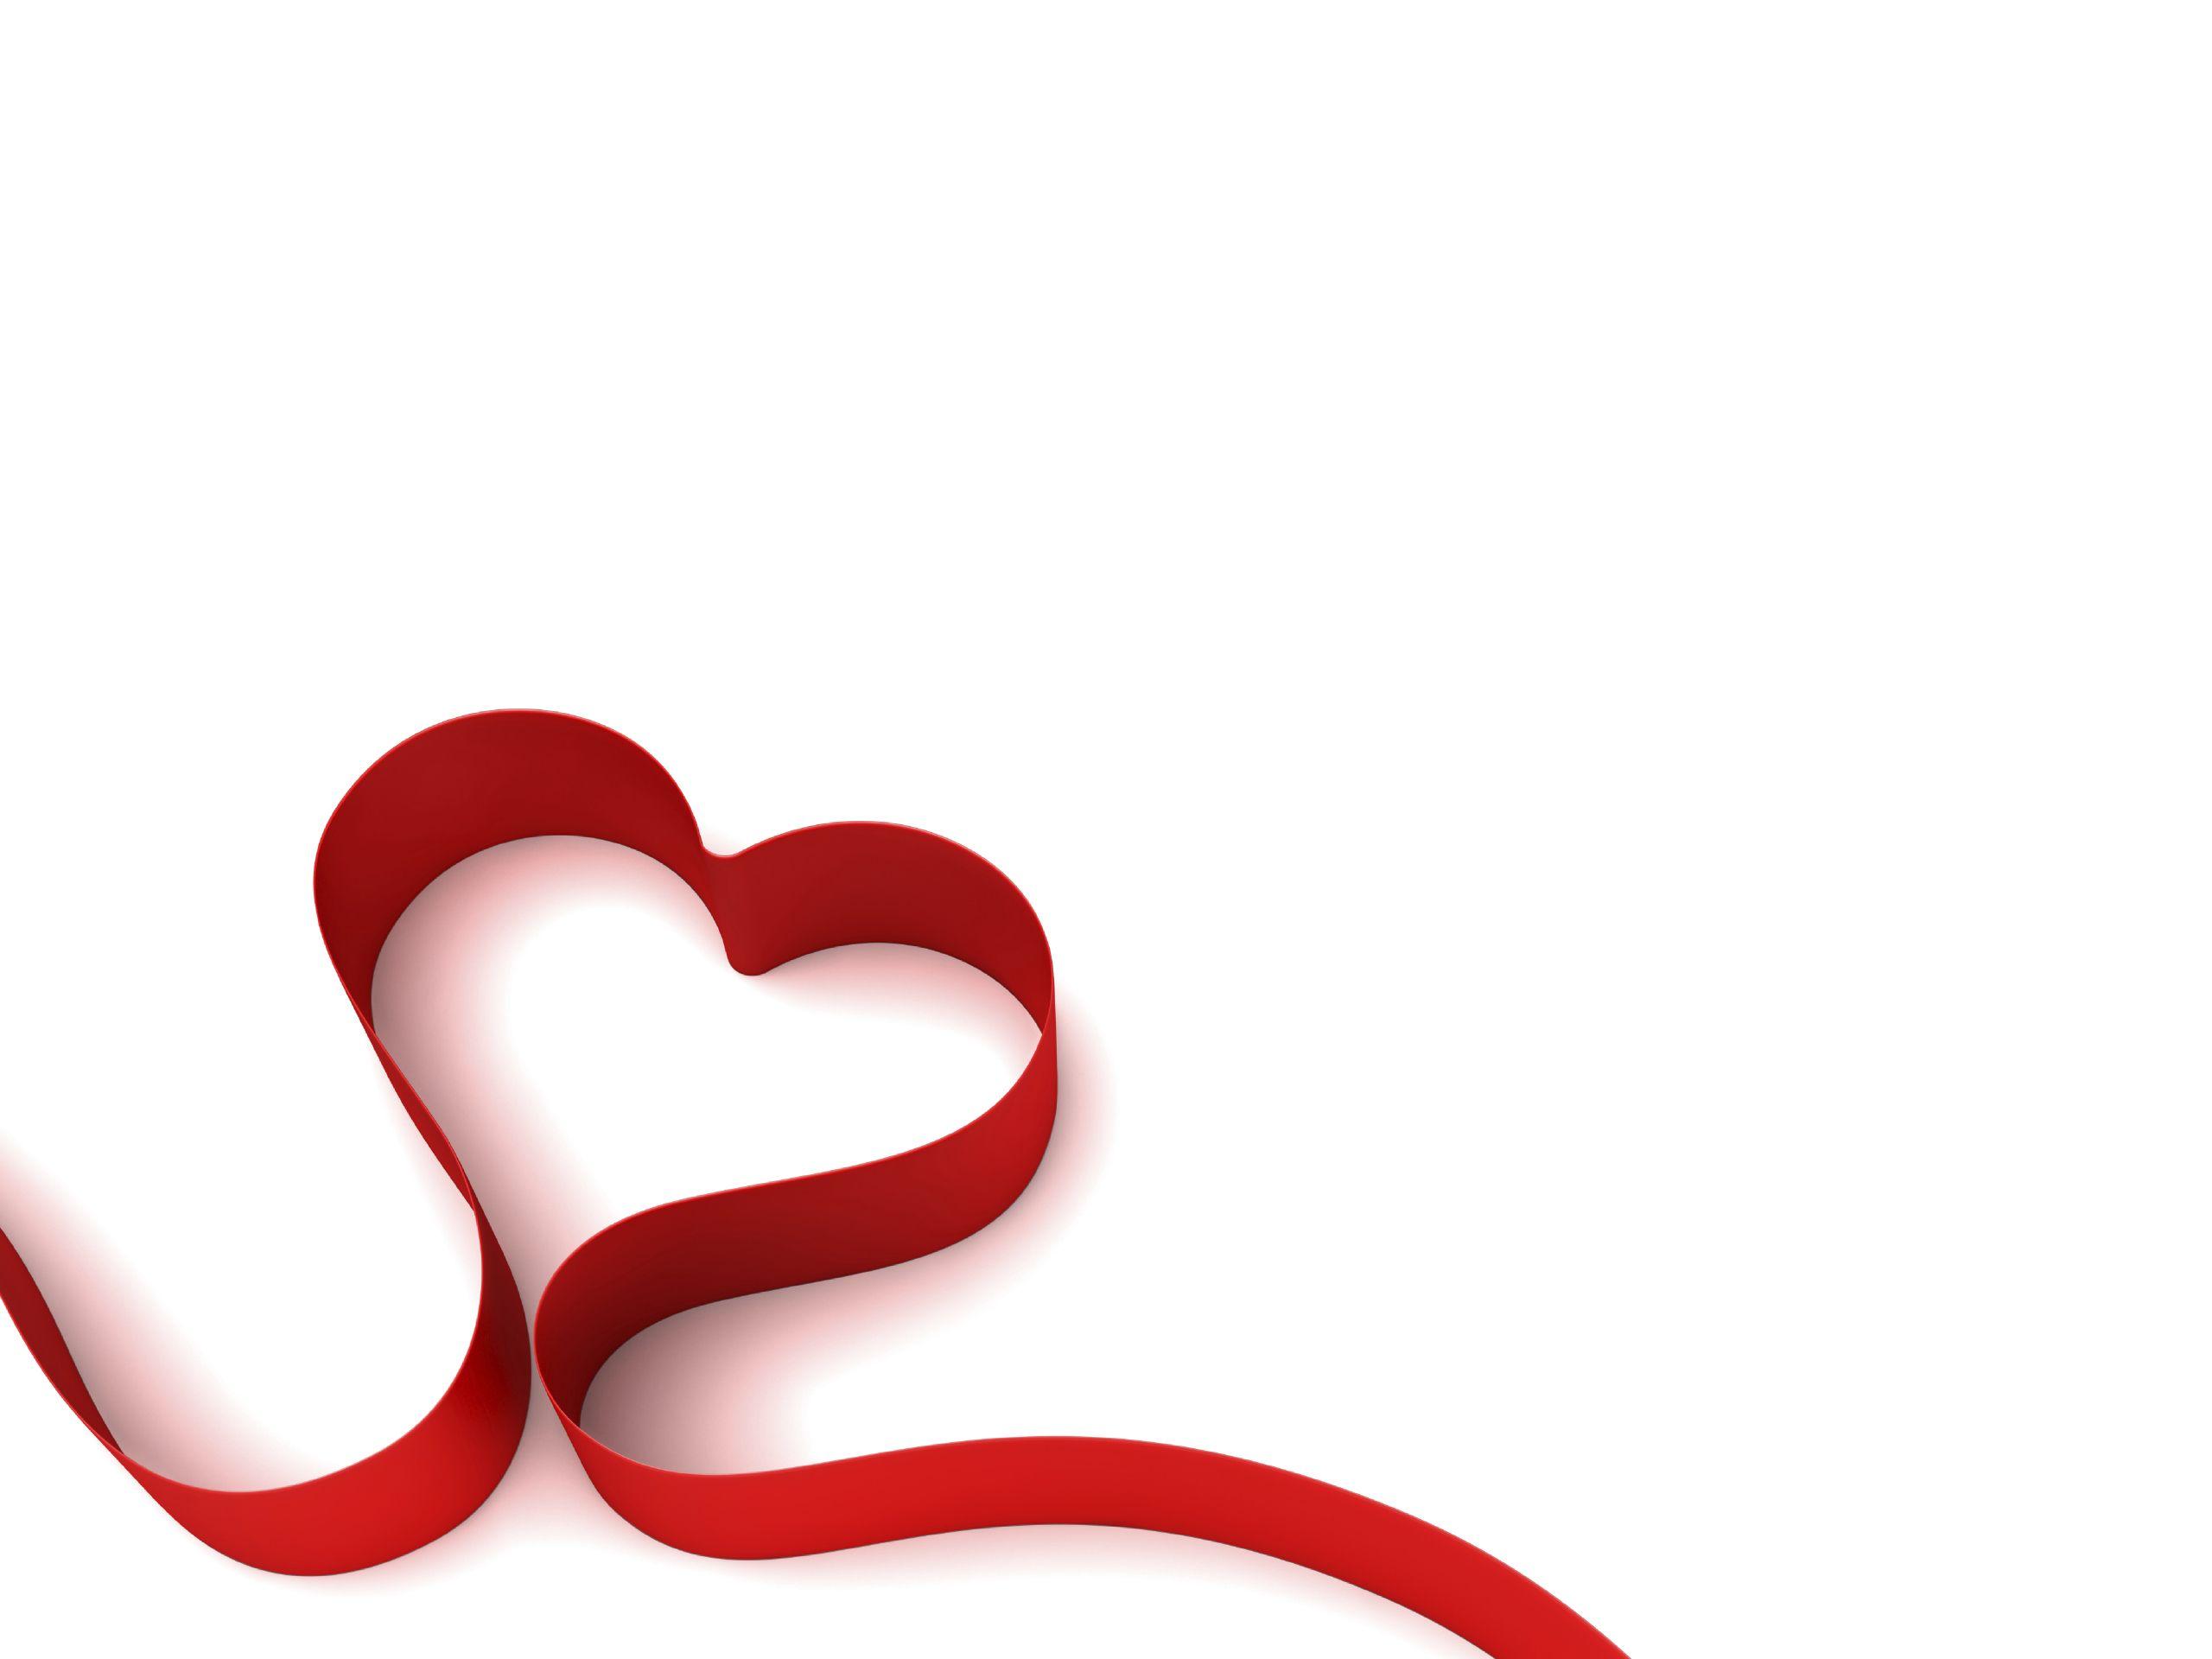 Simple Heart Background 17777 2560x1920px